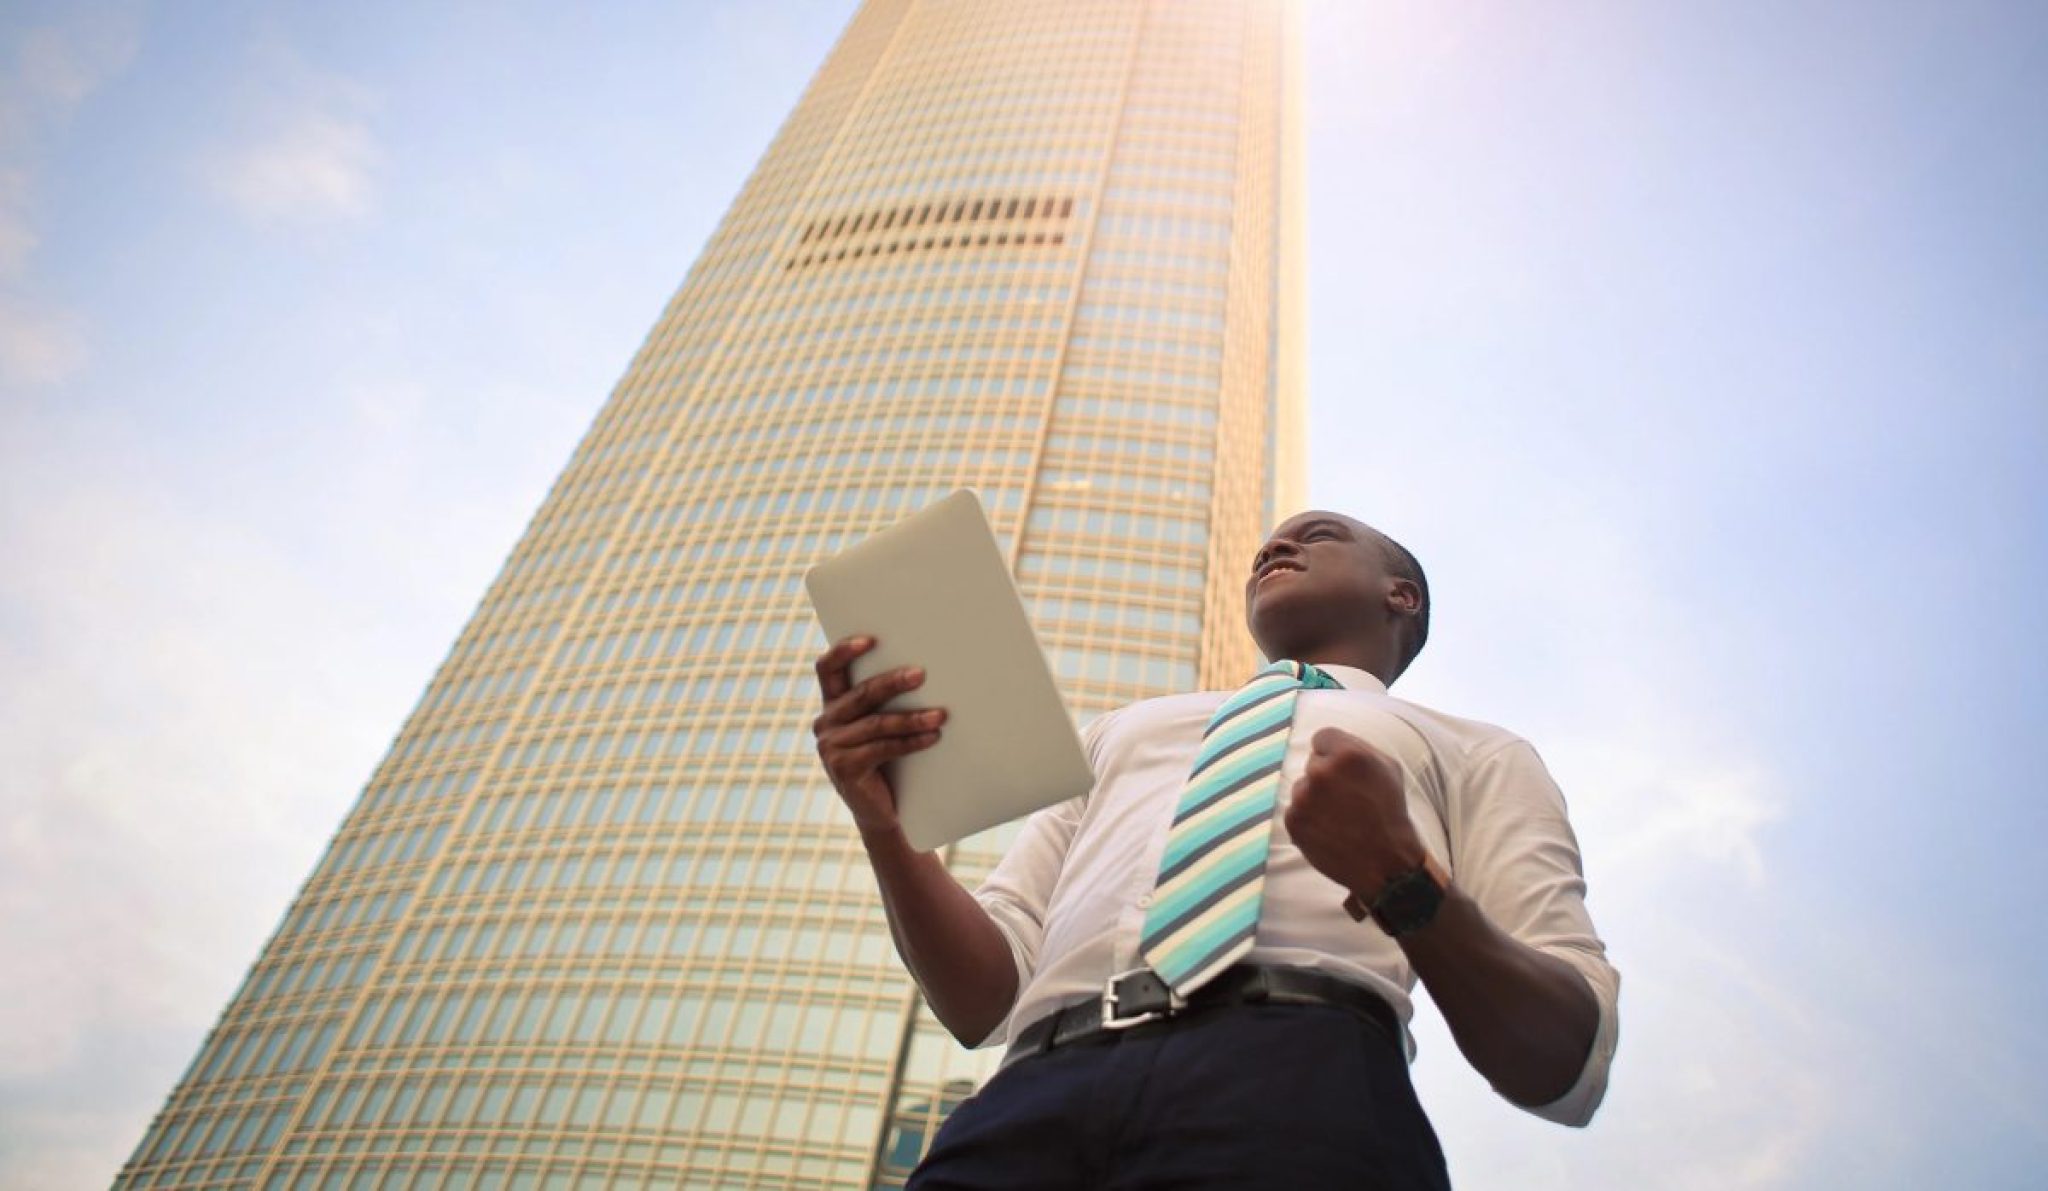 a person holding a tablet in front of a tall building